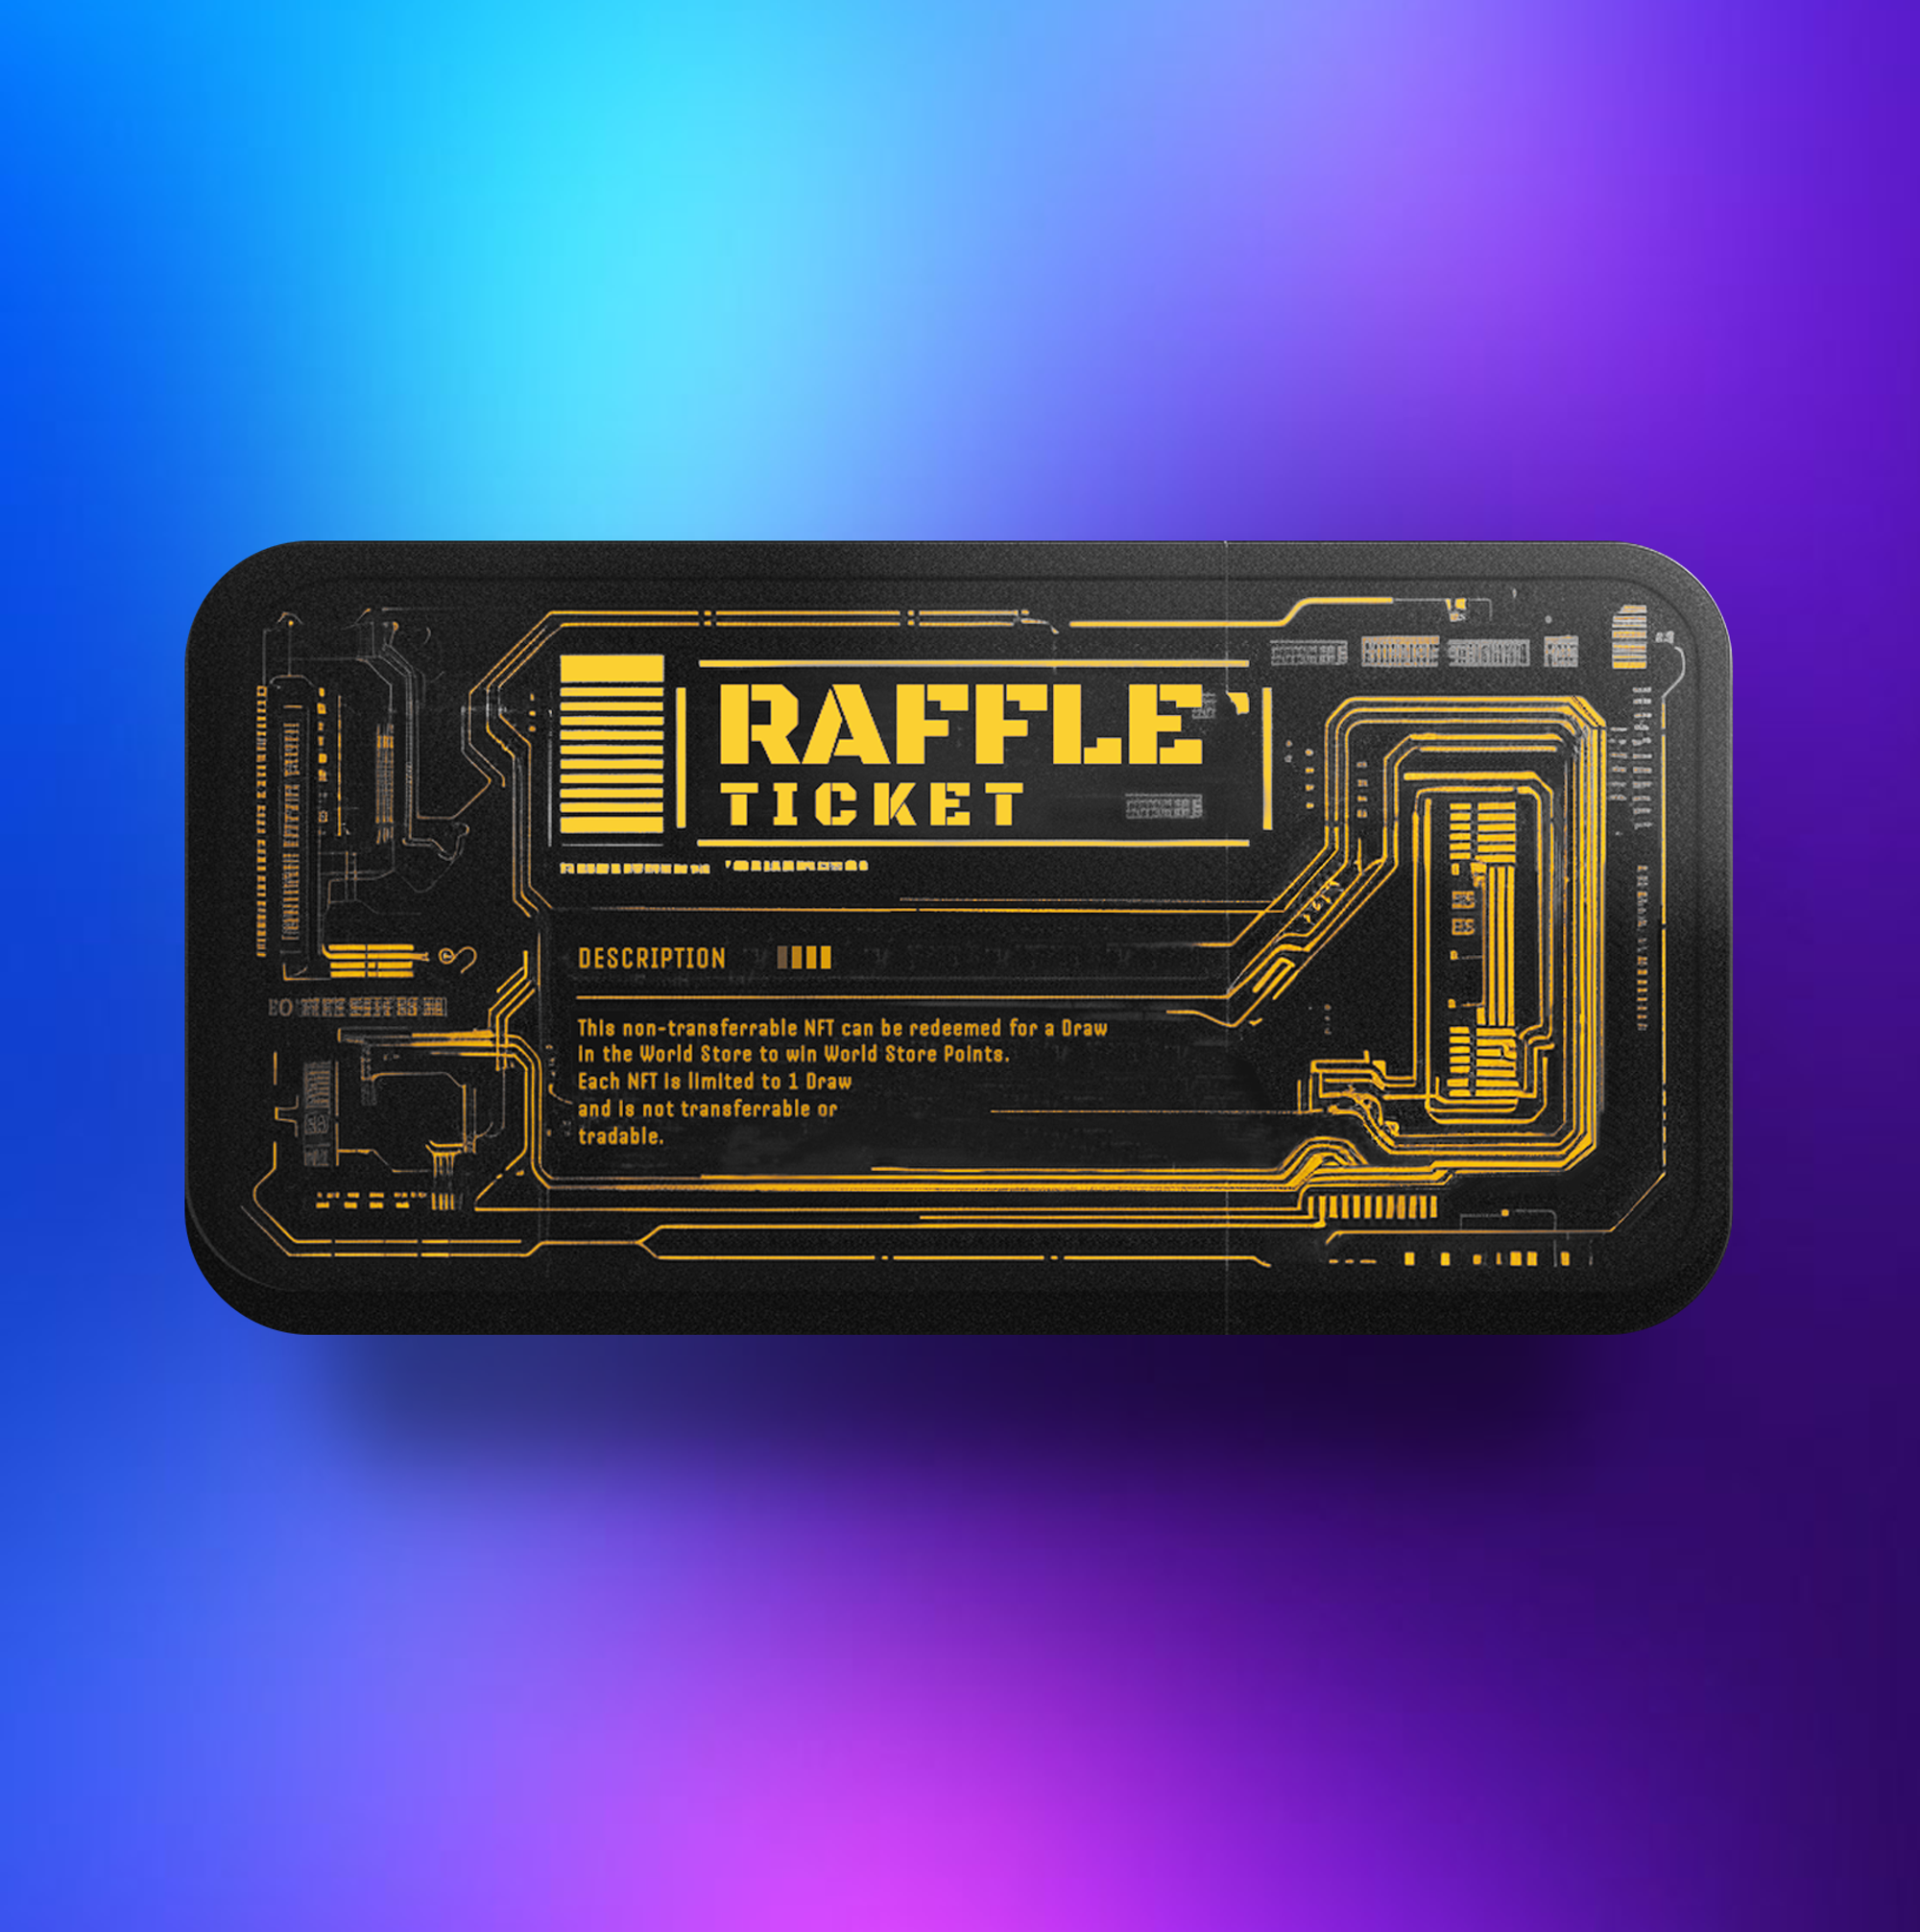 Raffle Tickets can be redeemed for Lucky Draw when World Store Launch on 12.18